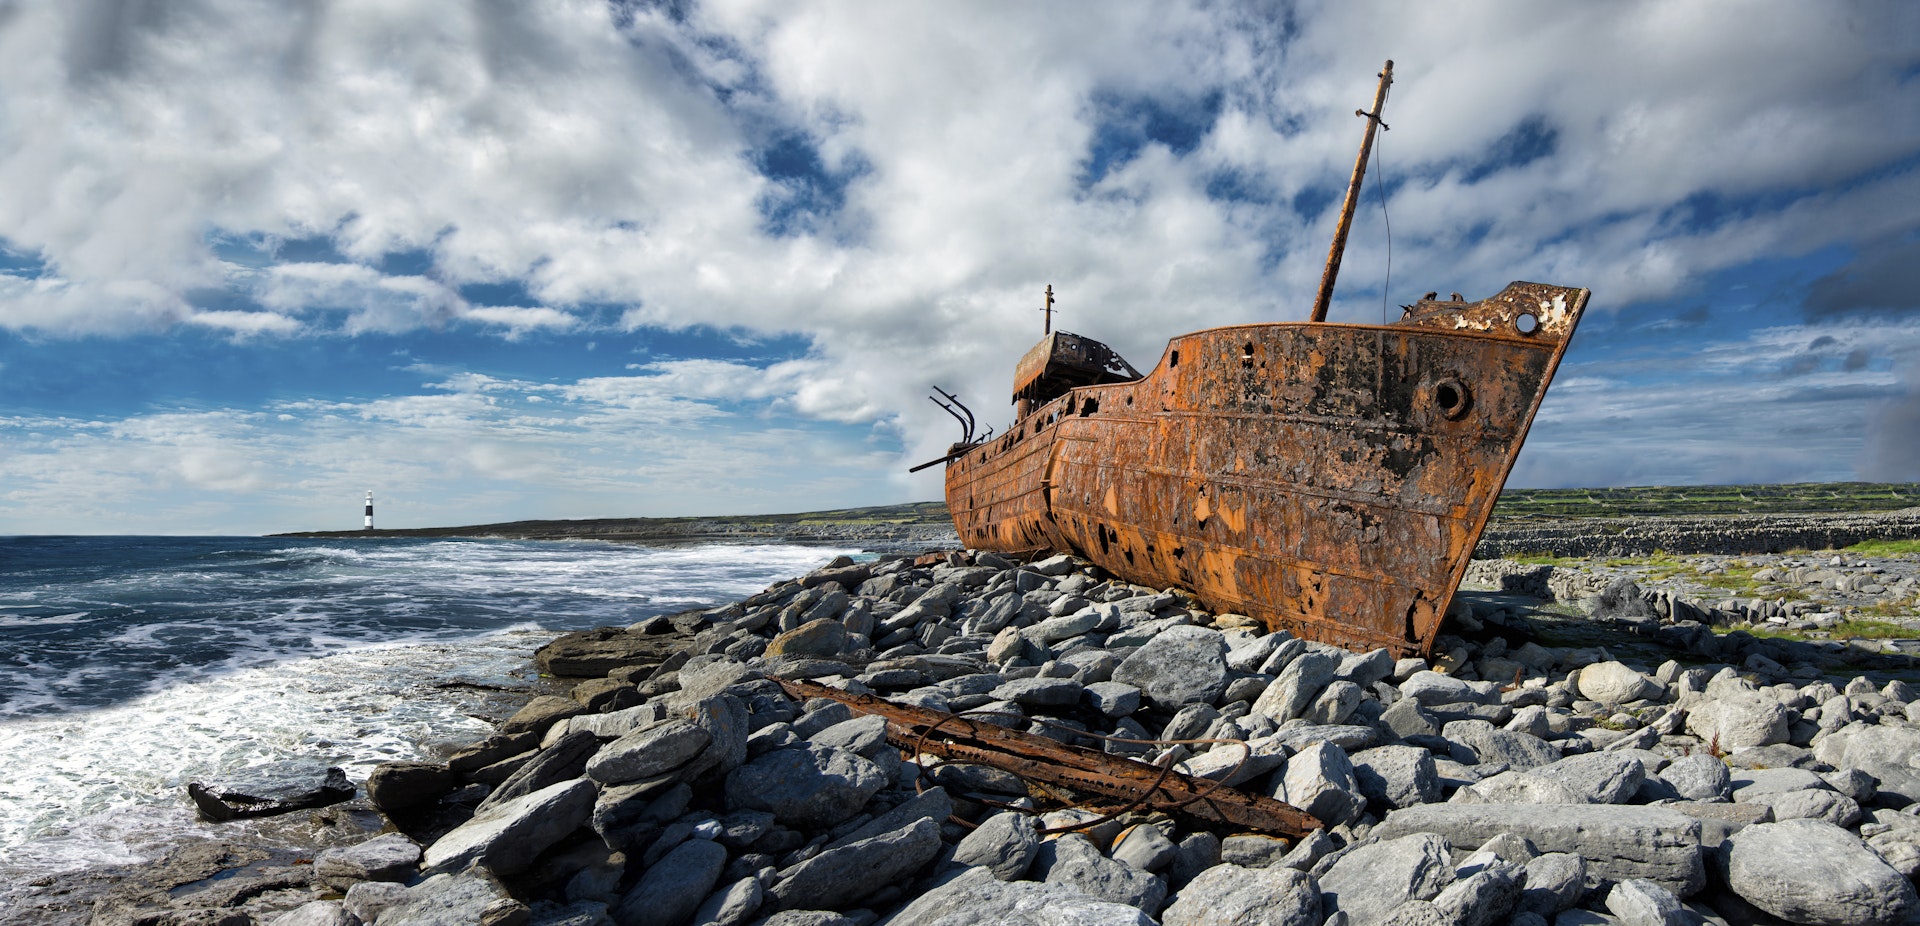 A rusted metal hull of a shipwrecked boat on a rocky shore